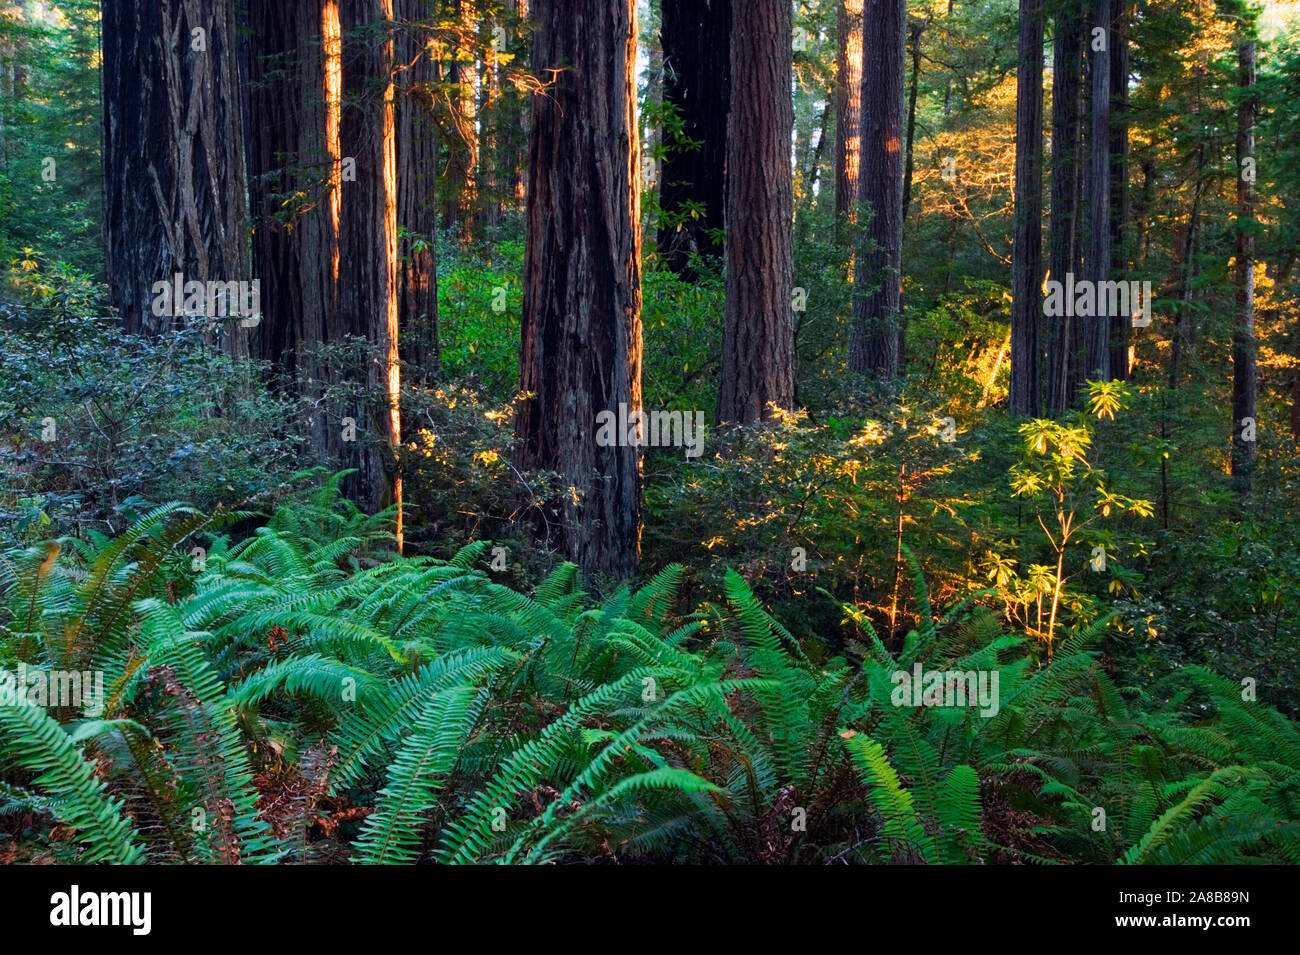 Ferns growing among redwood trees in forest, Redwood National Park, California, USA Stock Photo